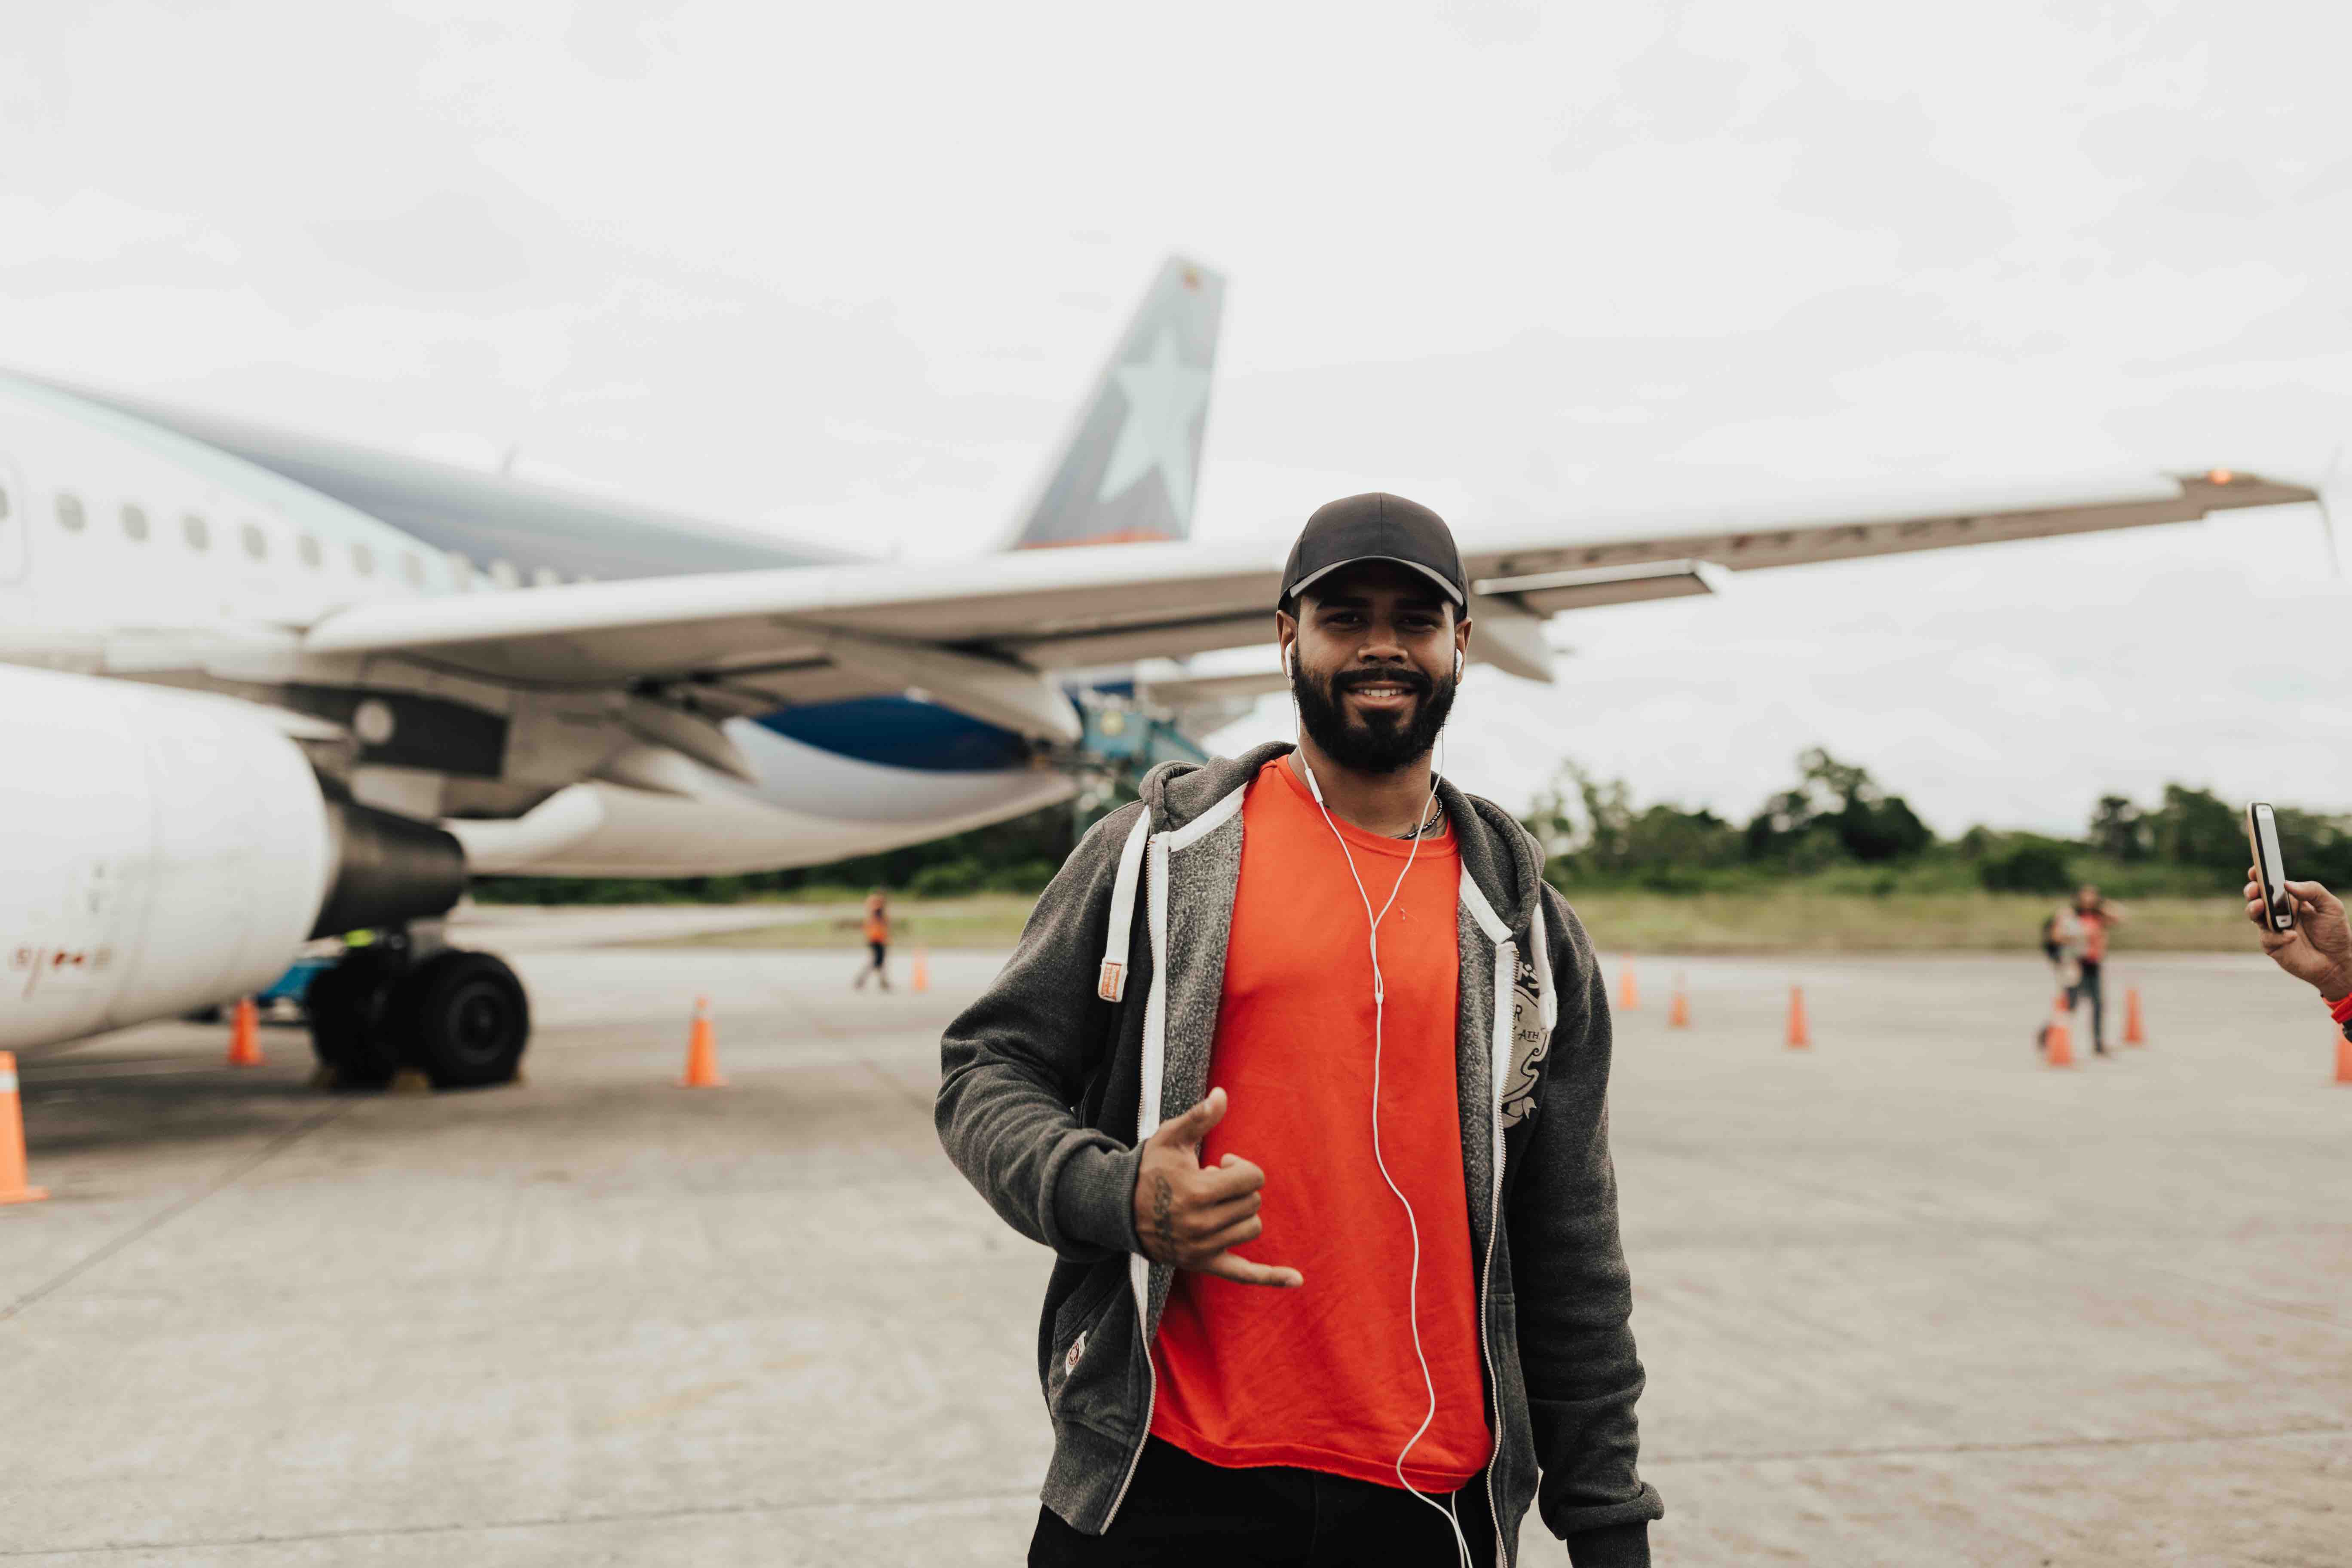 YWAM missionary standing in front of an airplane on the tarmac